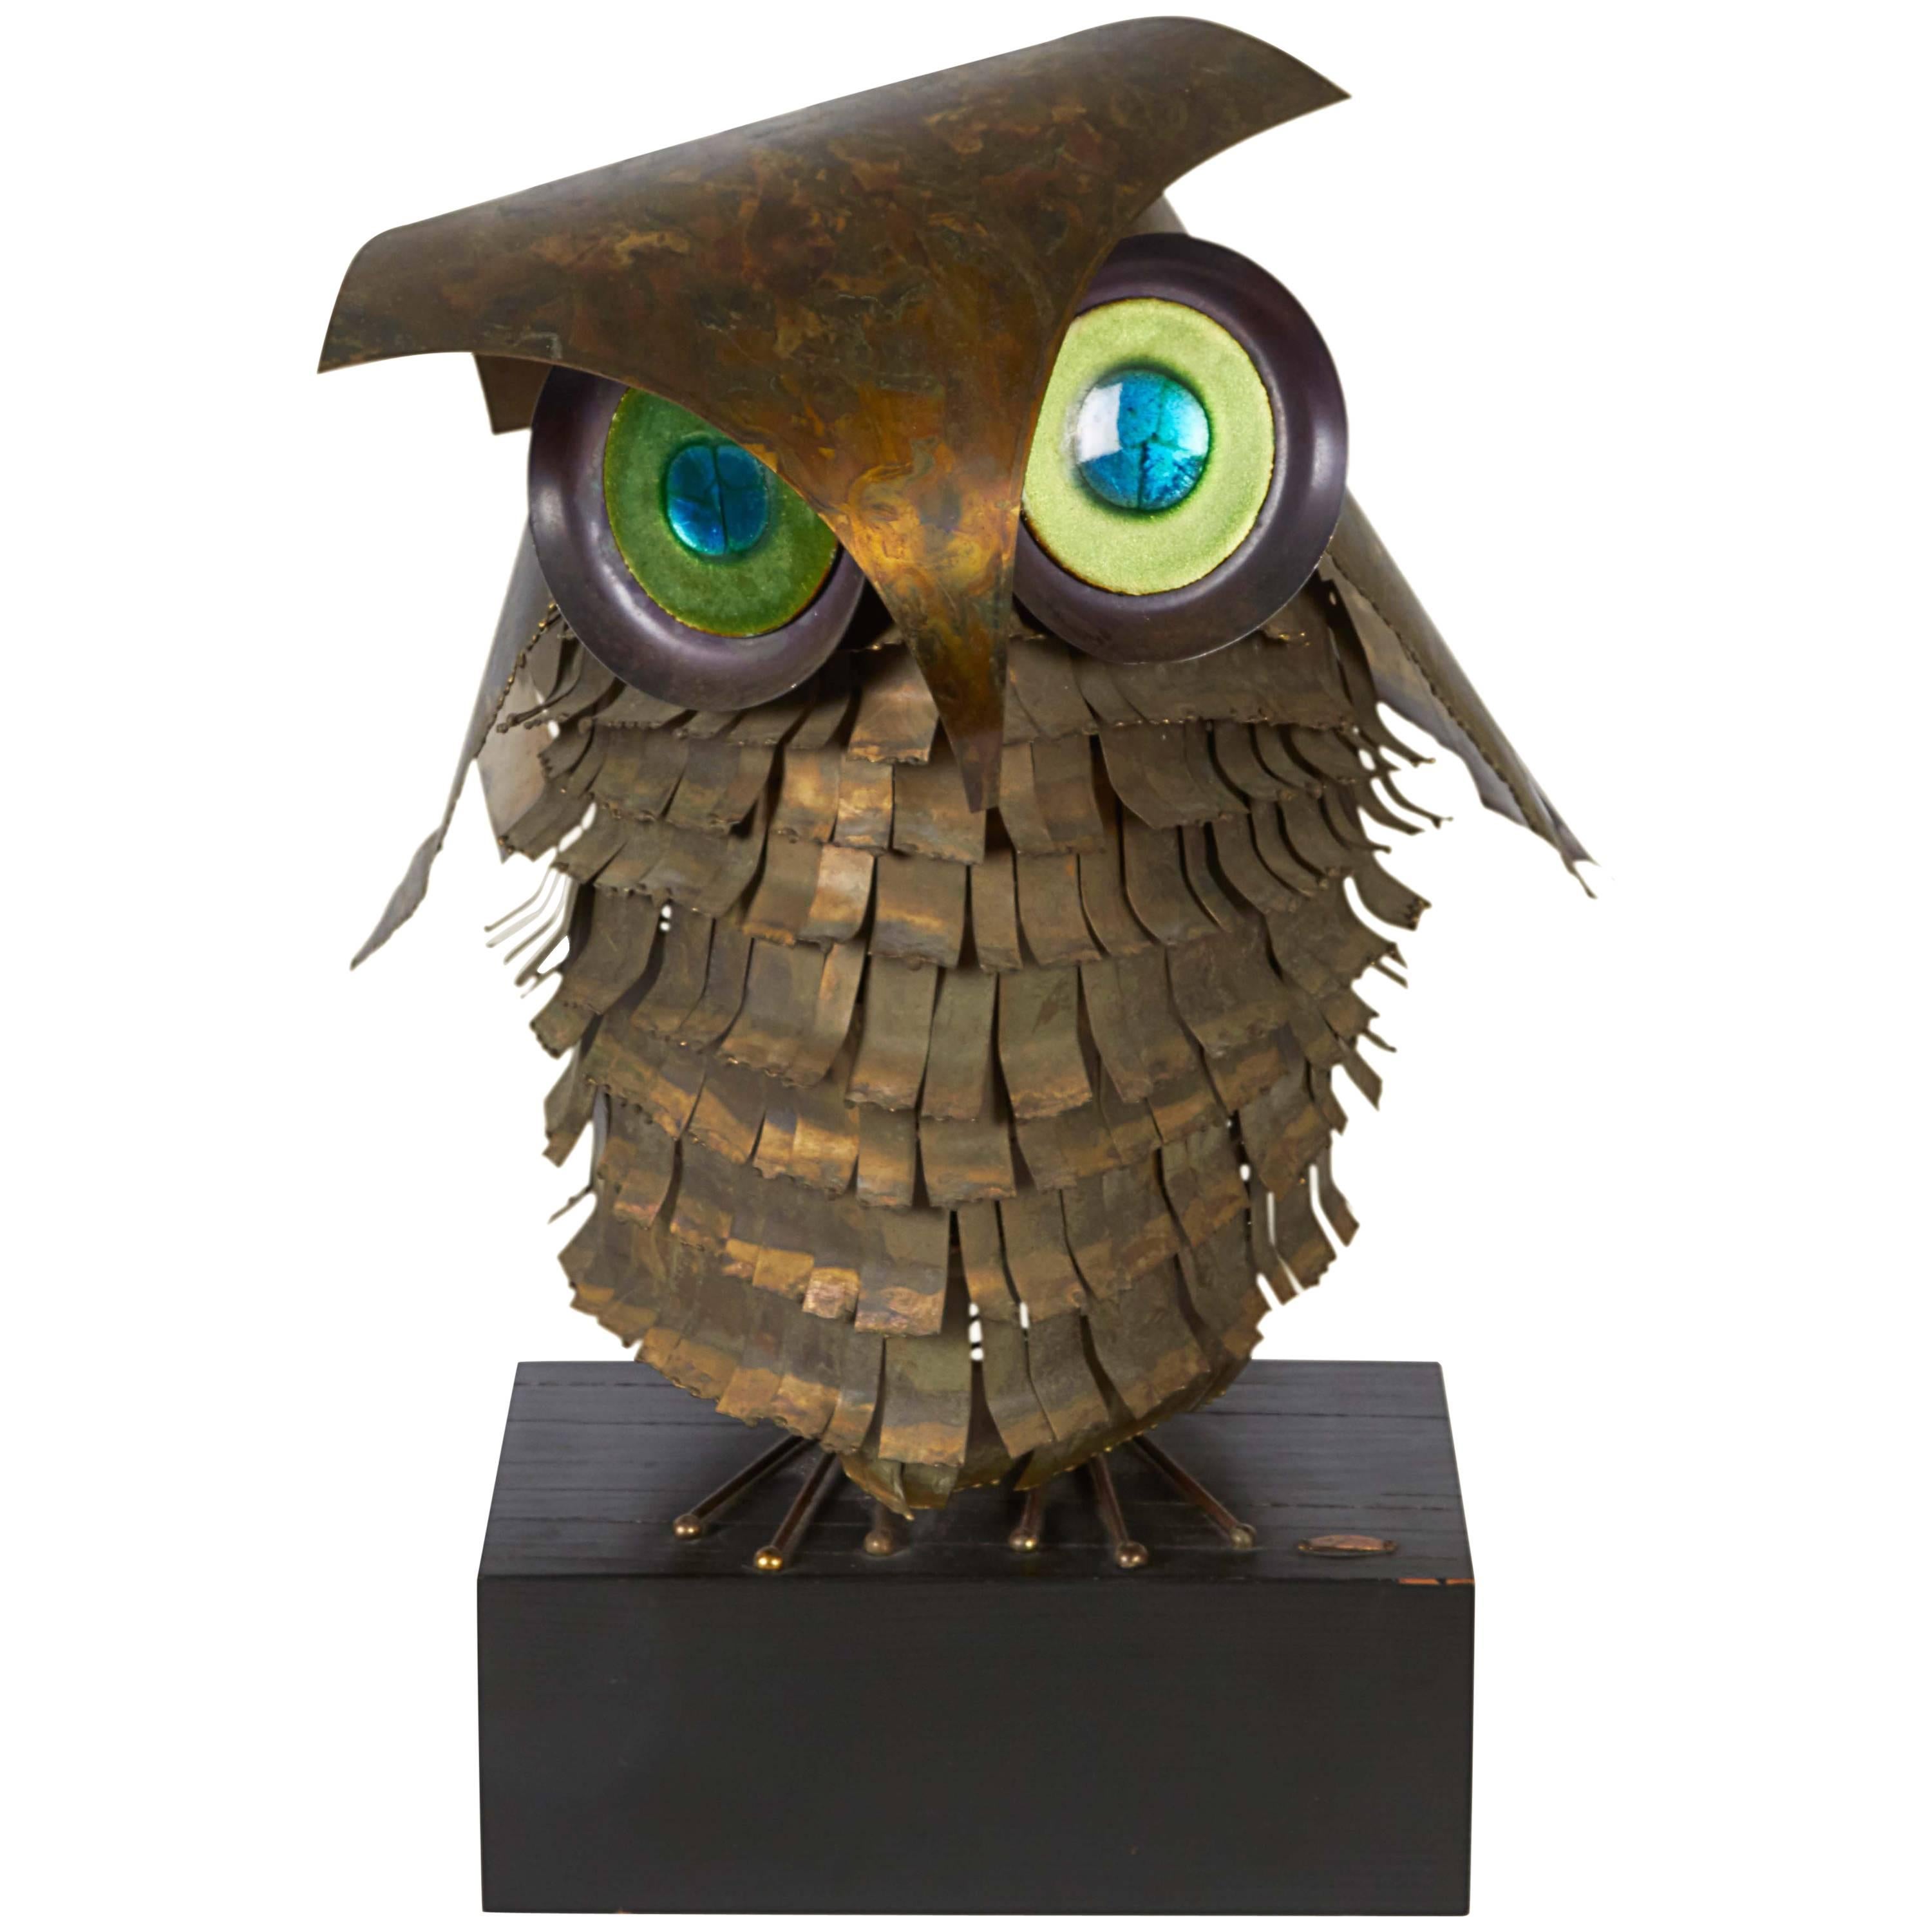 Curtis Jere Brutalist Owl Sculpture, Signed and Dated